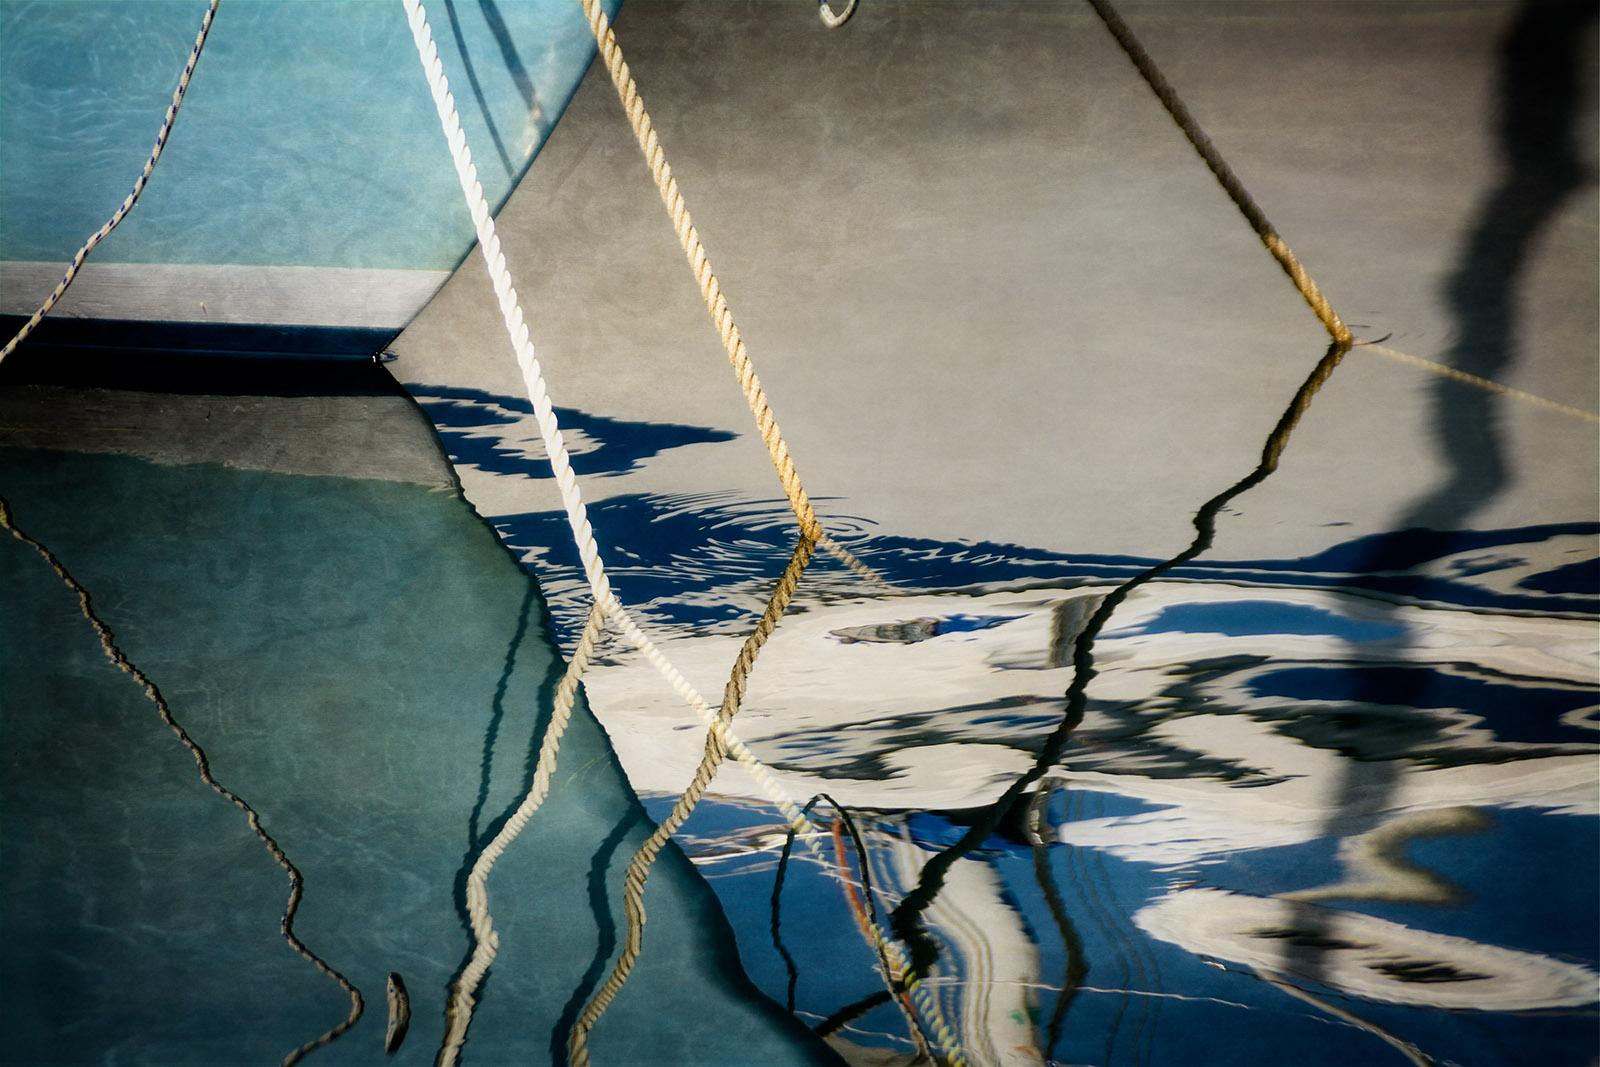 Michael Banks Color Photograph - Boat 3 - Signed limited edition abstract pigment print, Large seaside blue photo